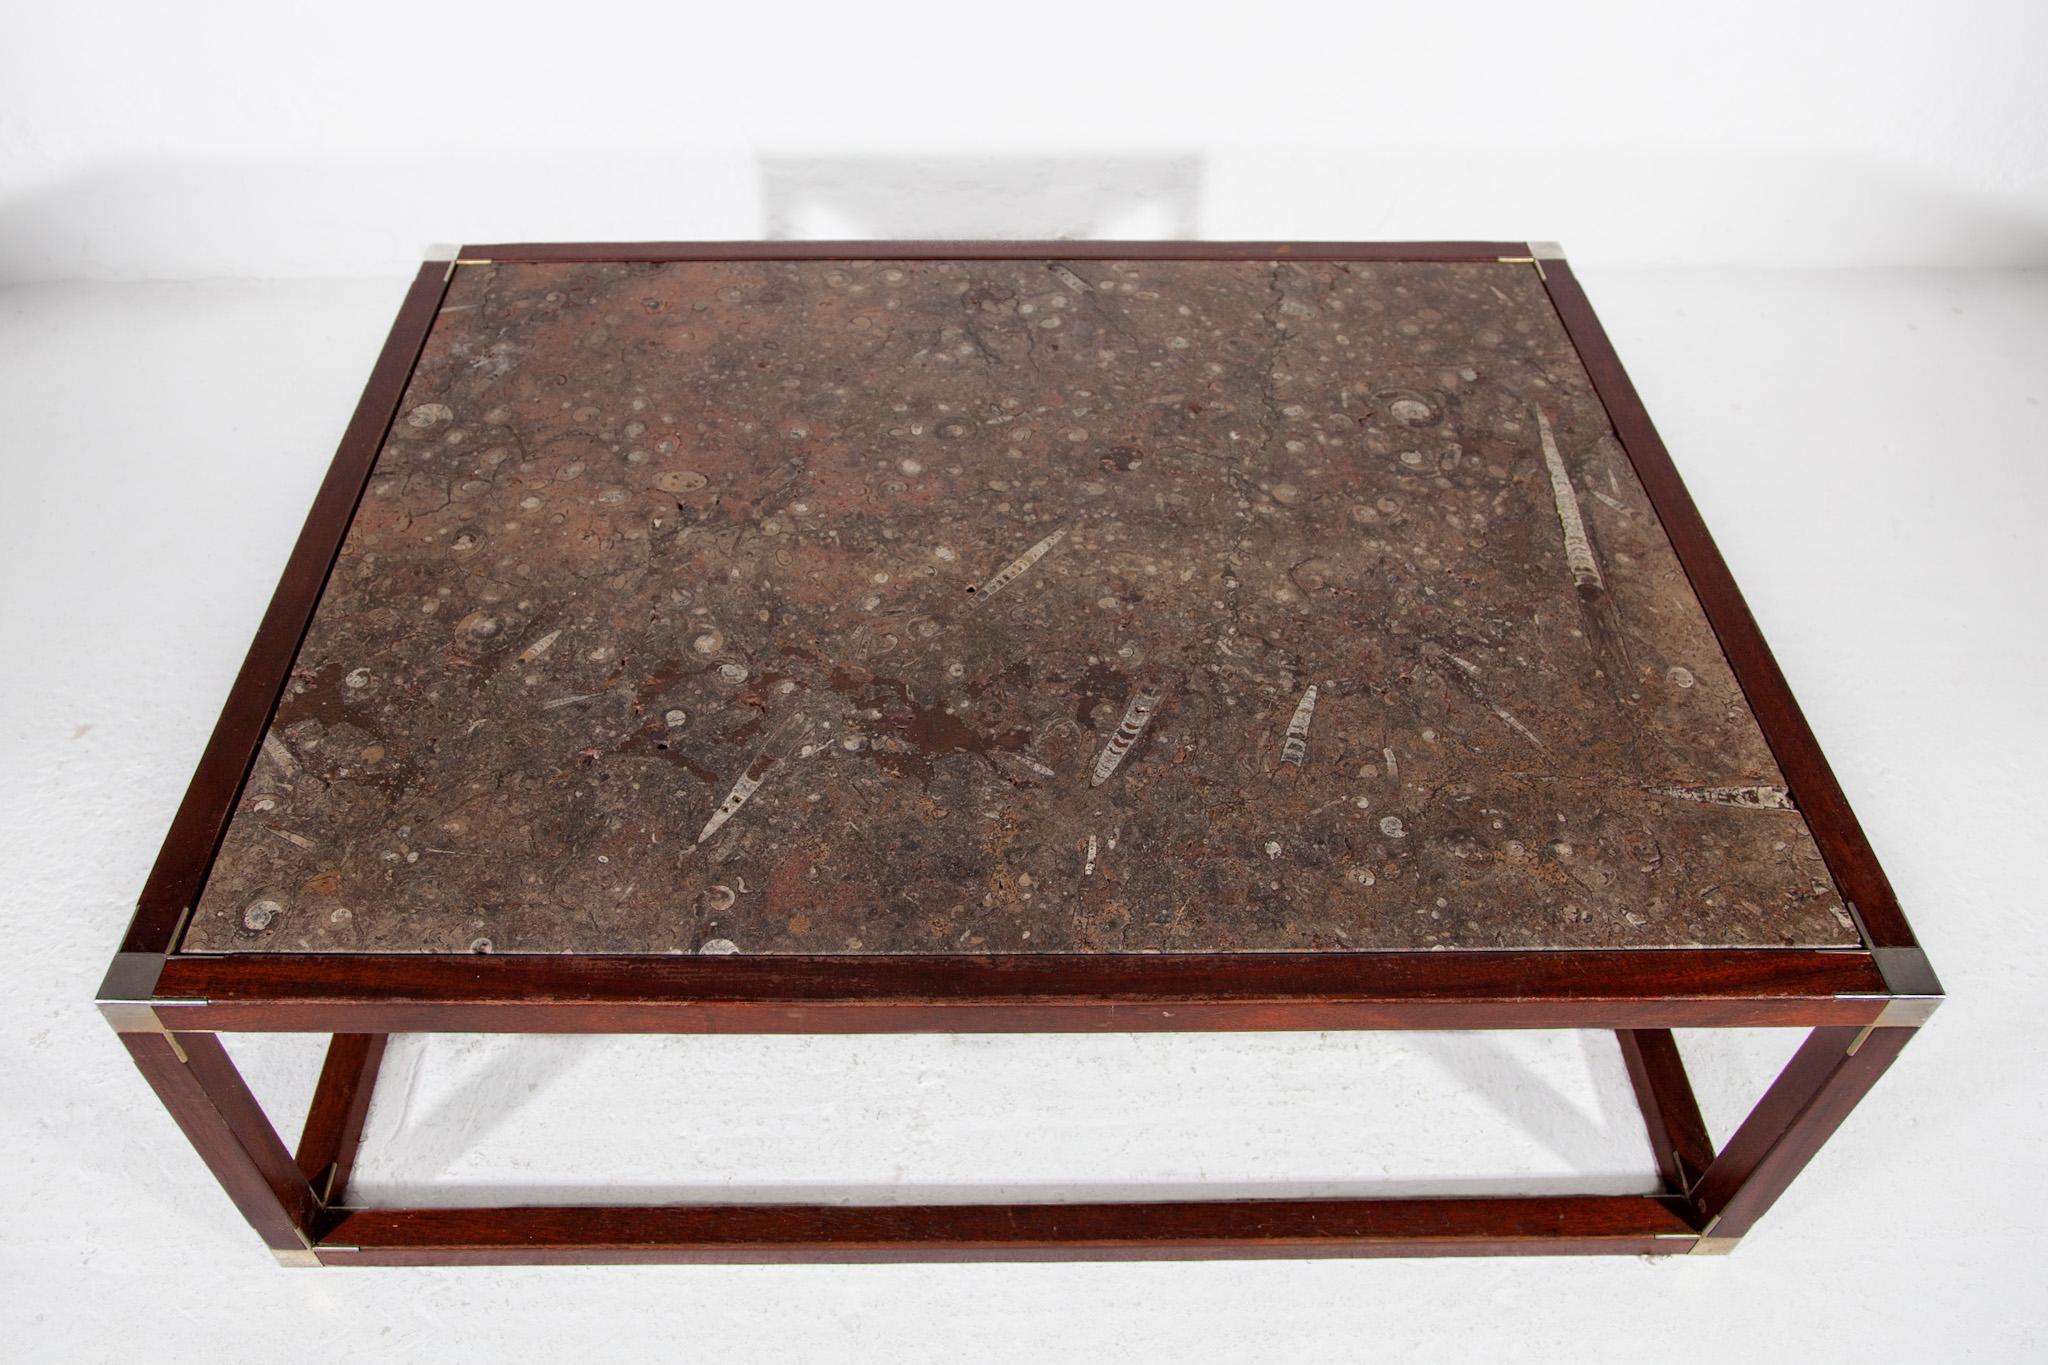 Art Deco very nice one-off large with 40 Million year old fossil stone top coffee table, 1930s. This table has a spectacular sculptural fossil stone top, in very deep brown, grey and soft red earth colors full of fossils. It has a very nice white